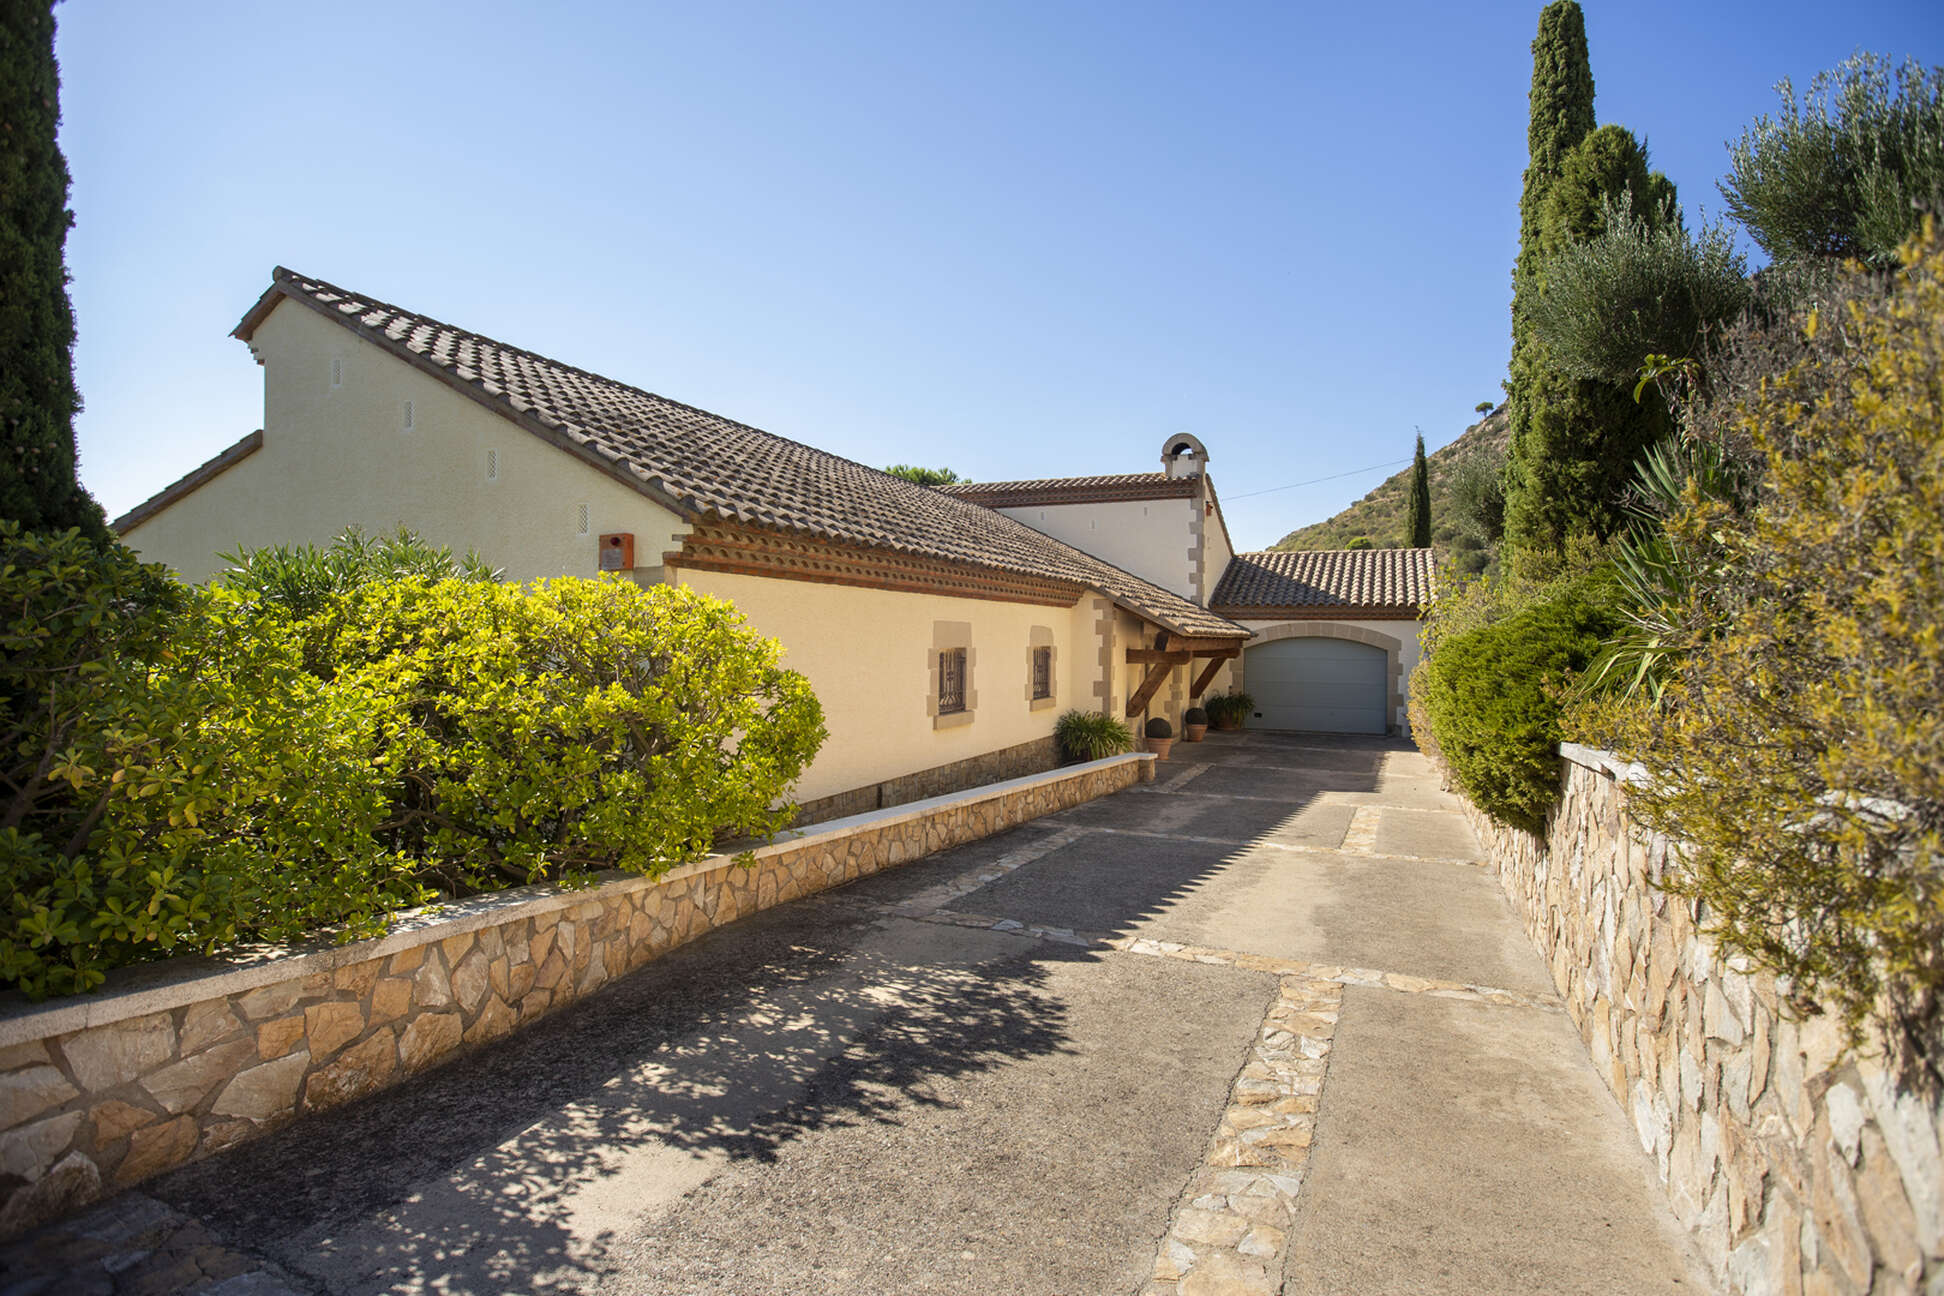 Beautifully located villa in the mountains of Els Olivars